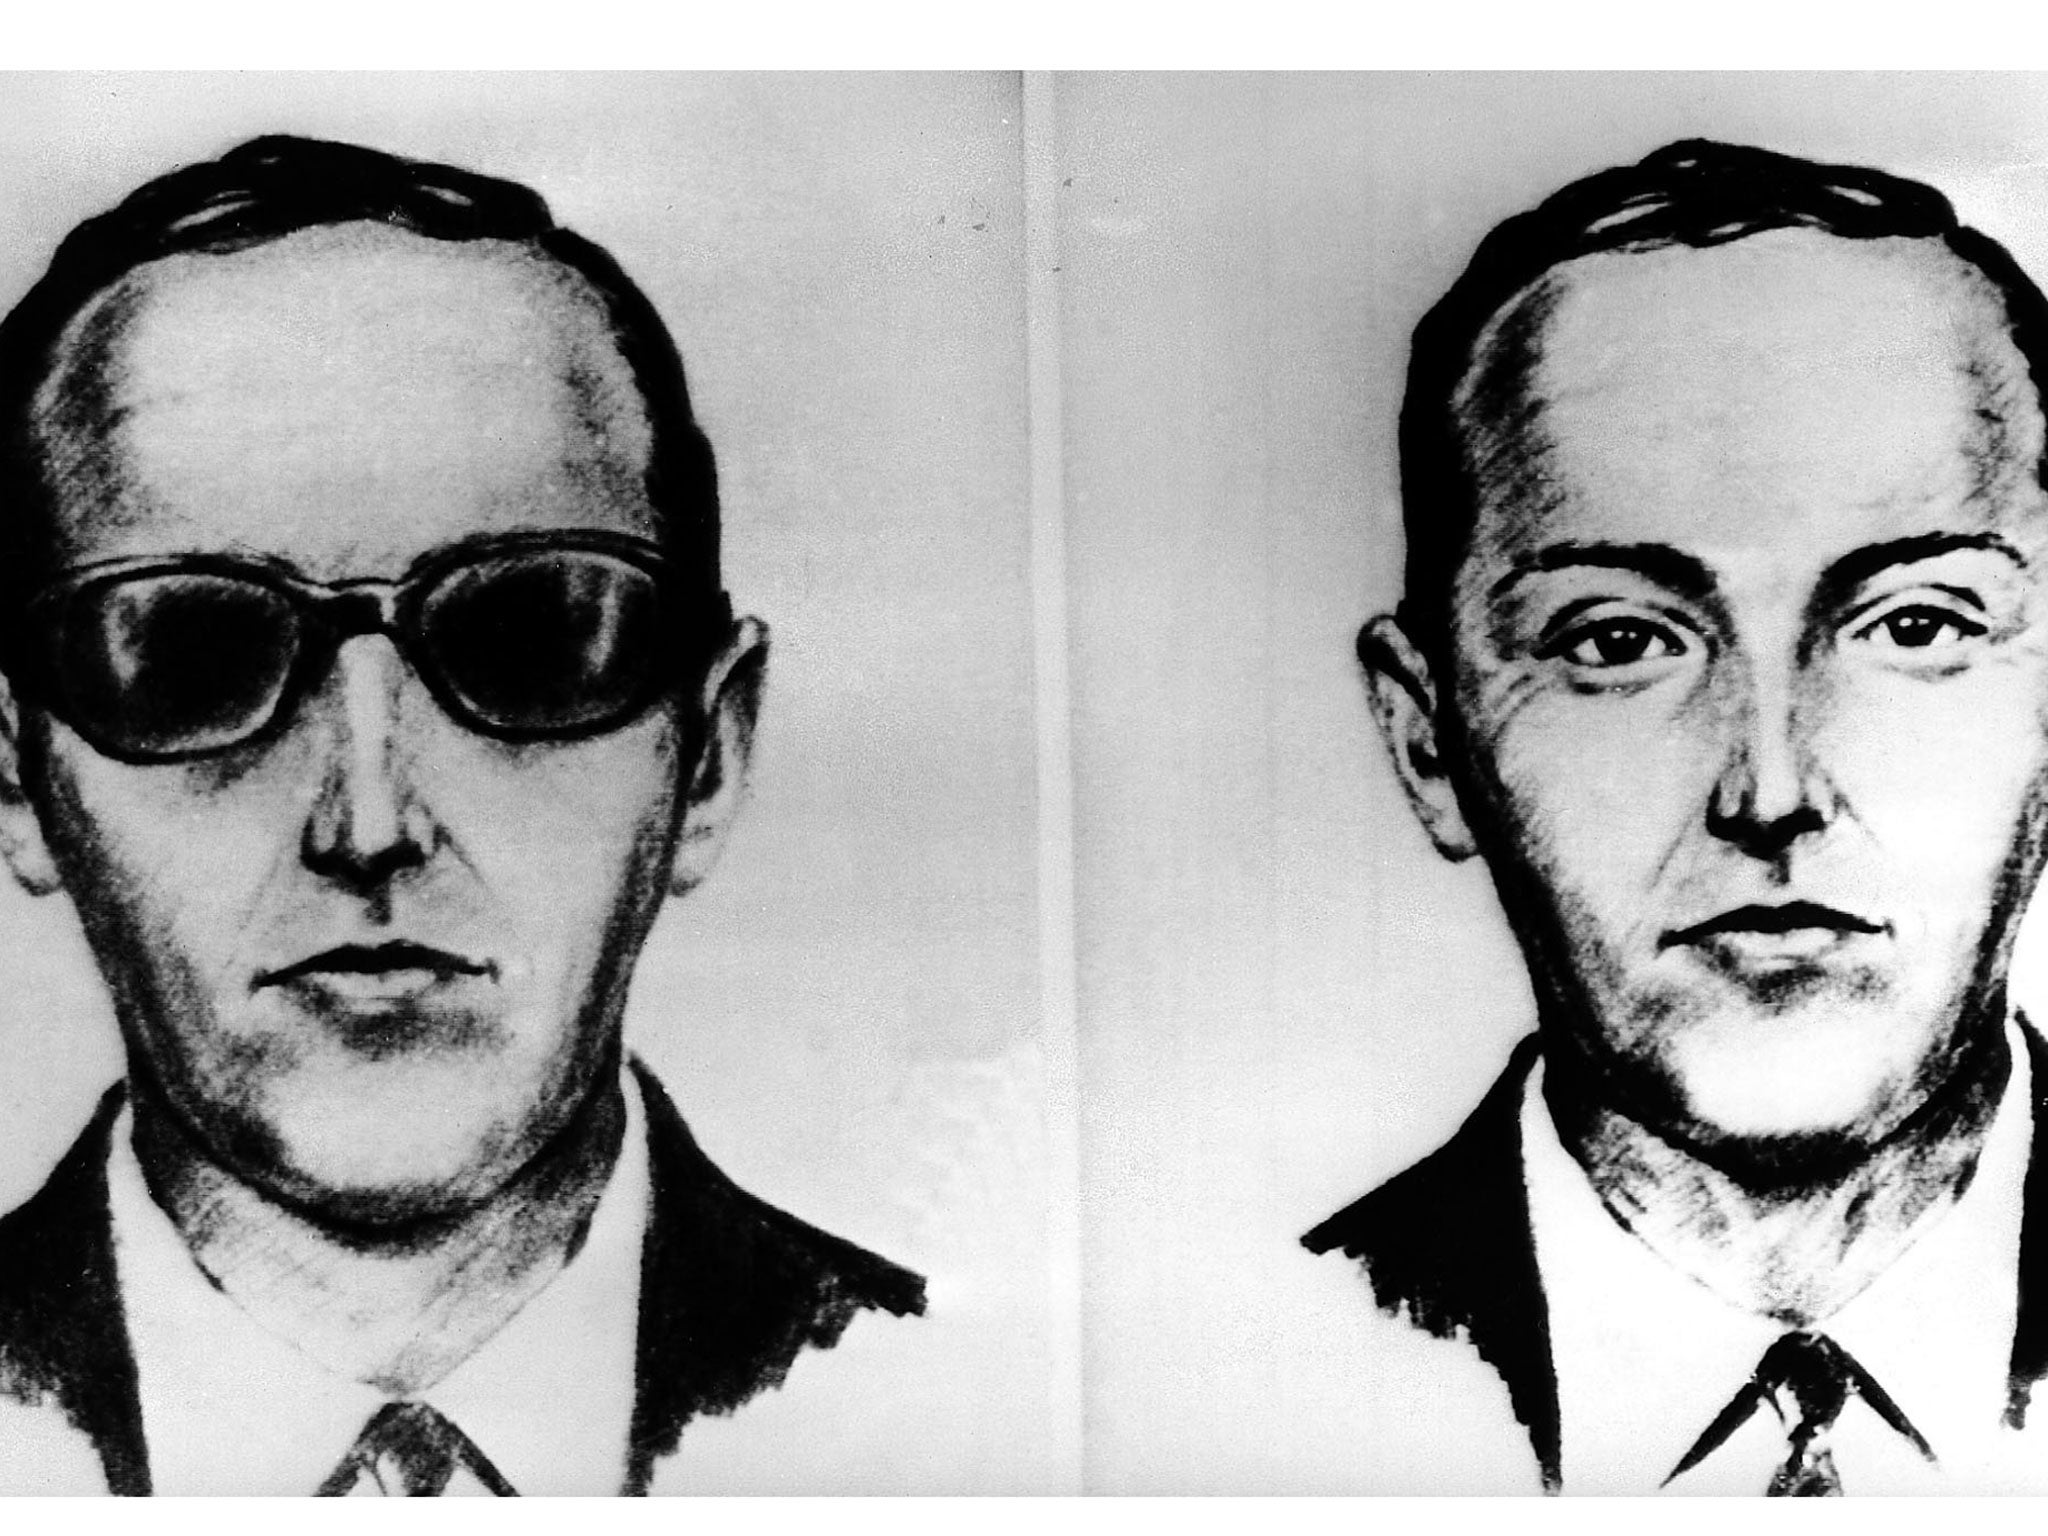 And undated artist's sketch of 'DB Cooper', based on the recollections of the hijacked passengers and crew